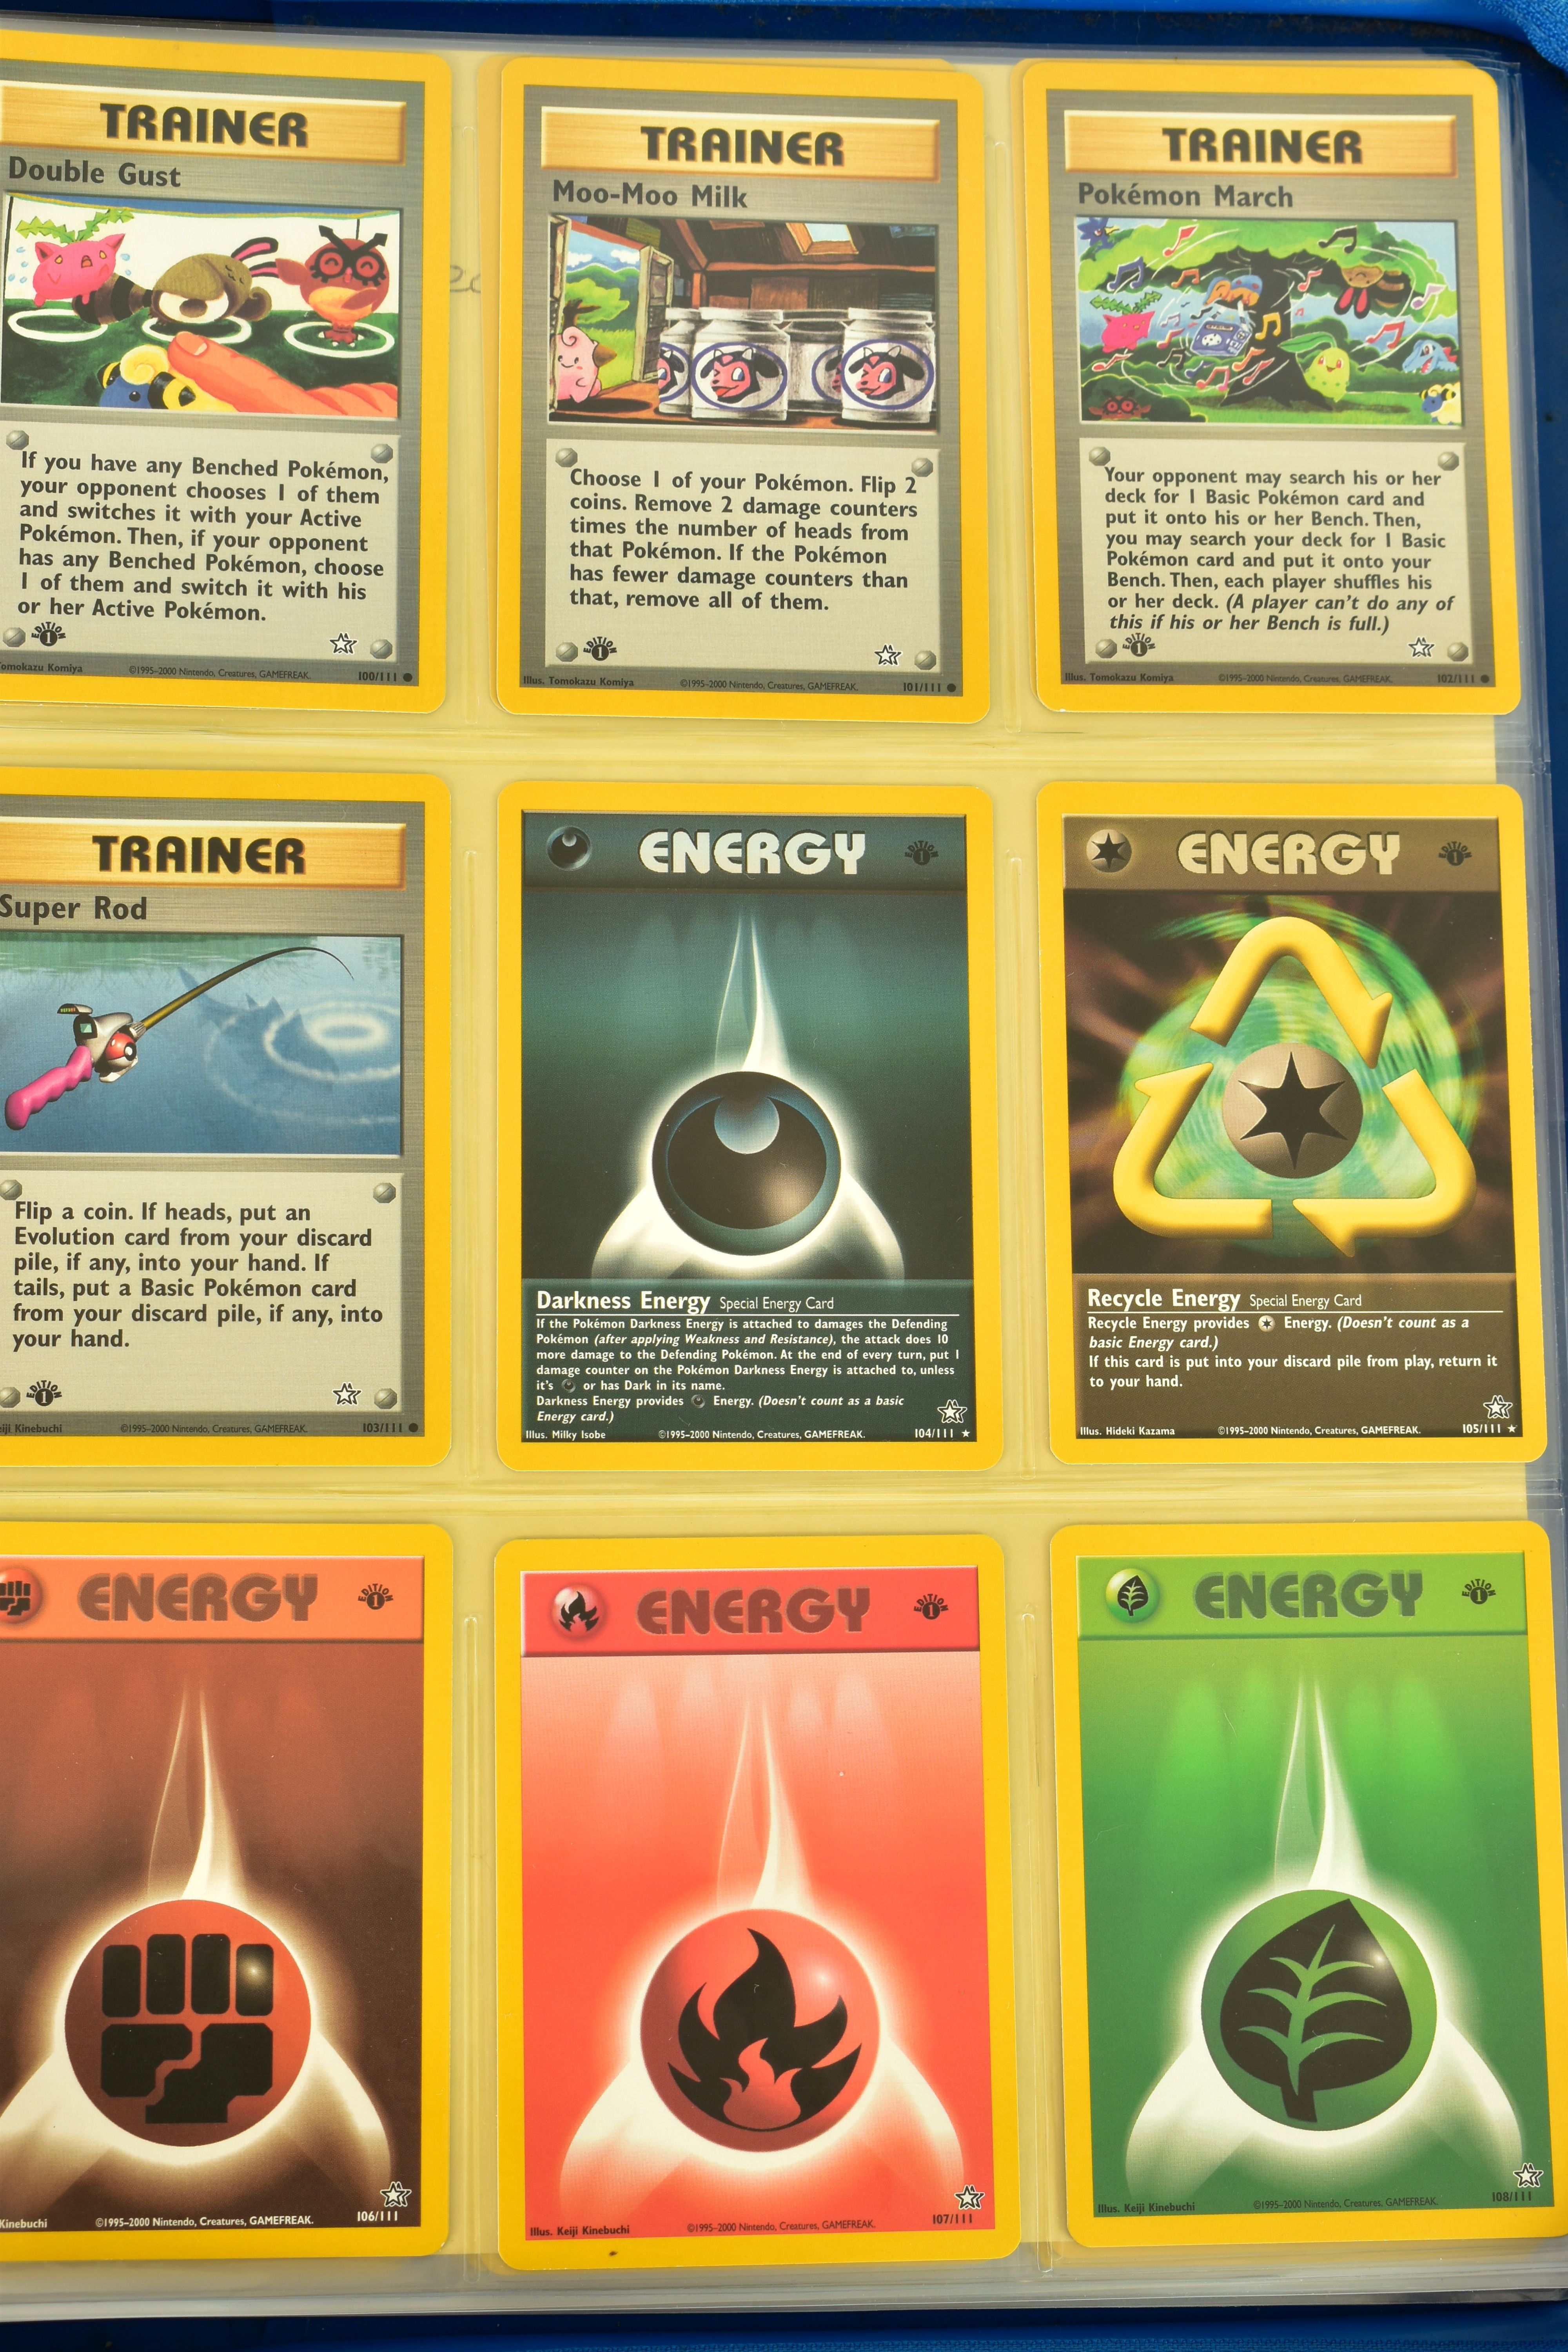 THE COMPLETE POKEMON CARD NEO GENESIS AND NEO DISCOVERY SETS, containing many first edition cards. - Image 18 of 32